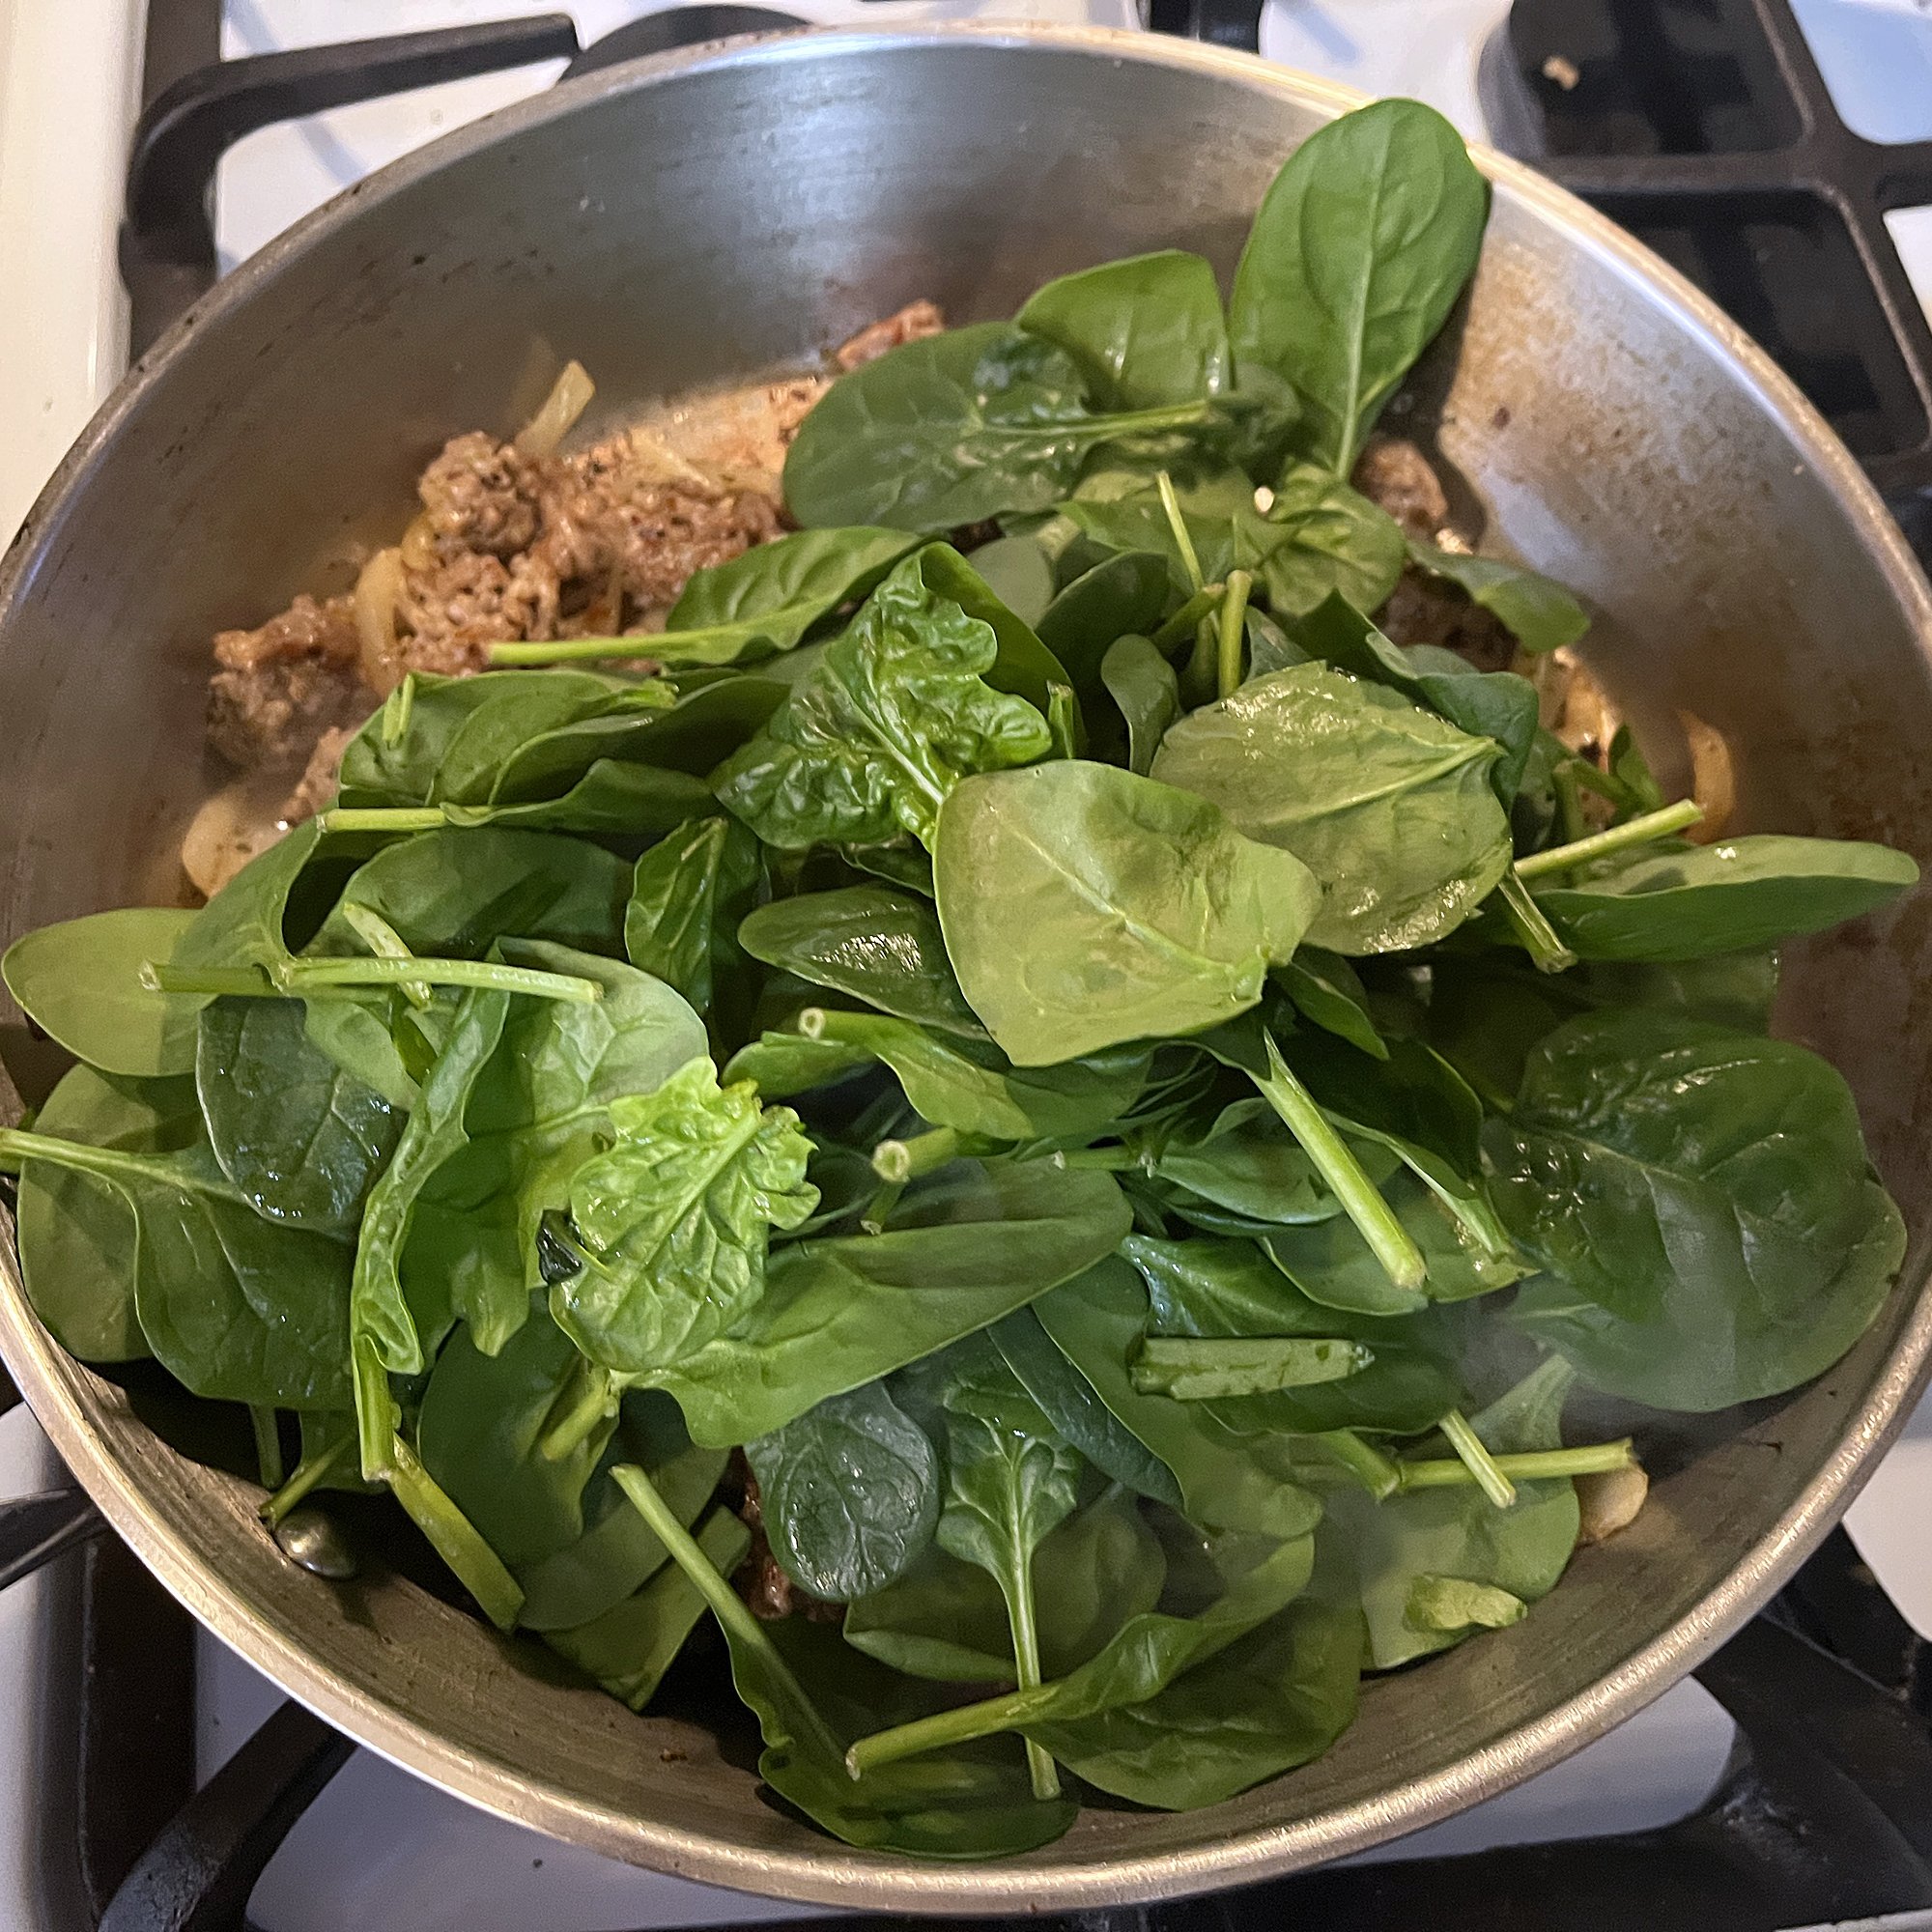 Reduce heat and add spinach.